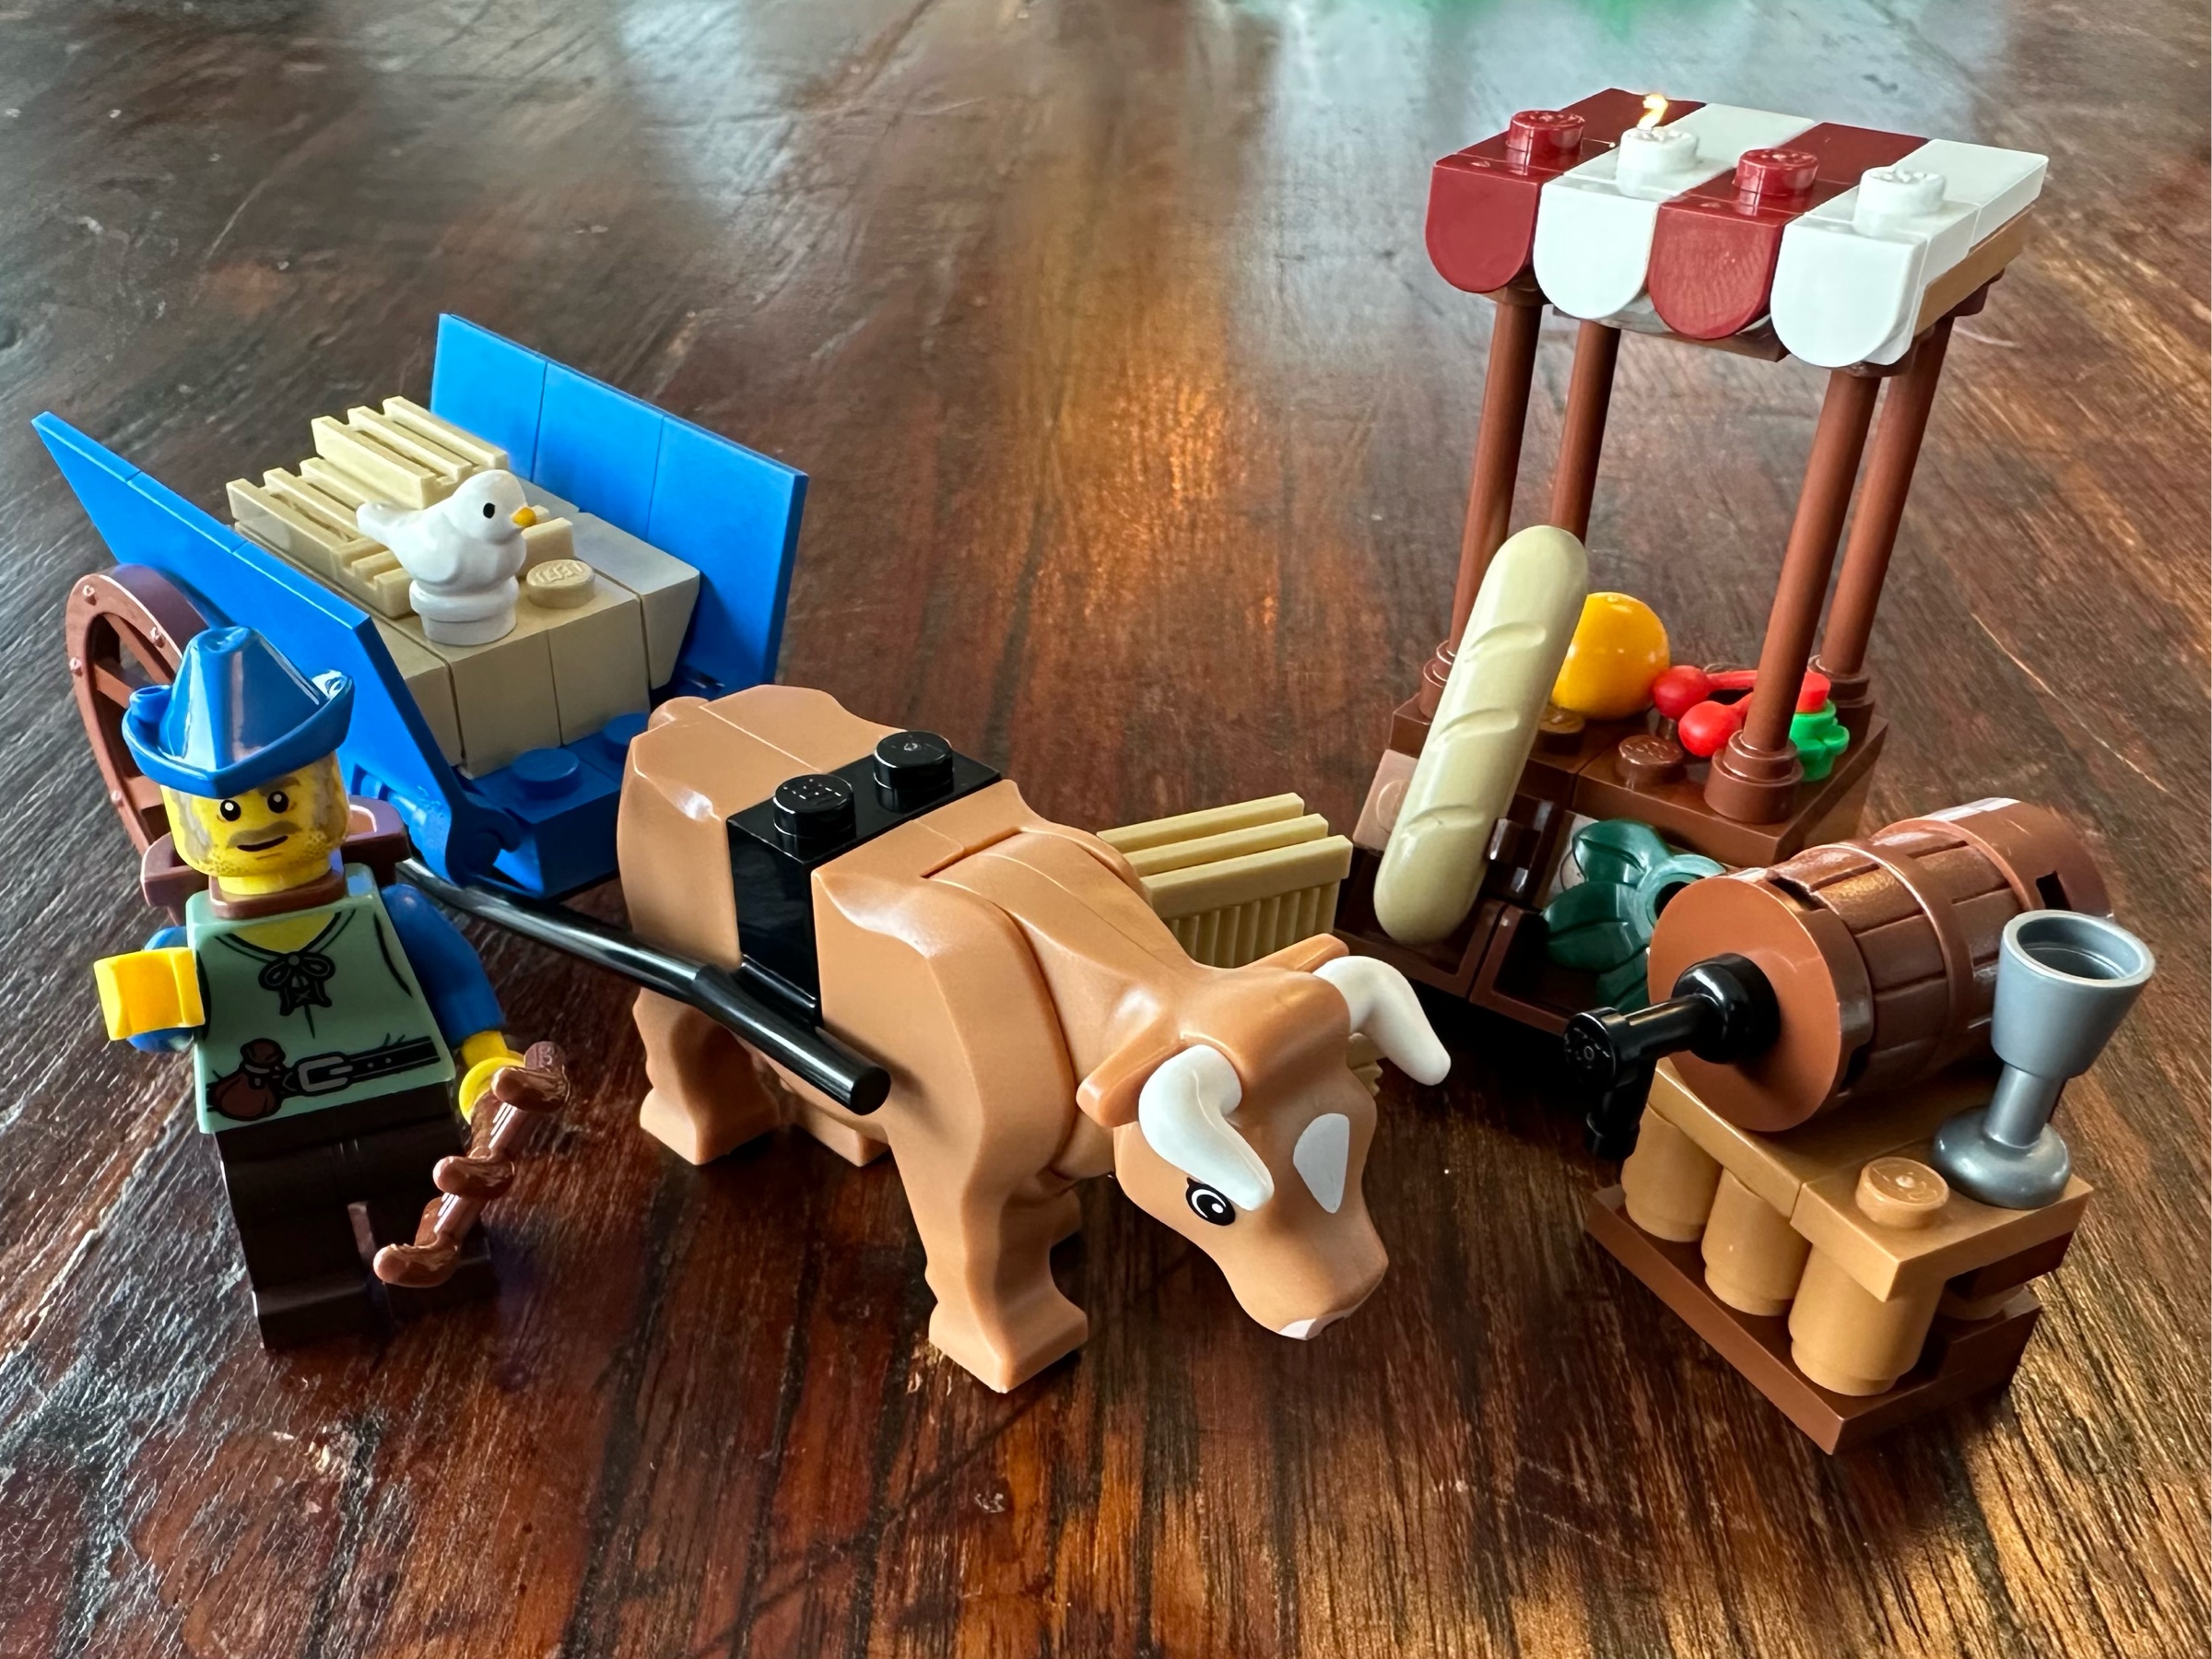 LEGO peasant holding a pitchfork, a cow drawing a cart filled with hay, a small market stocked with bread and produce, and a small table holding a barrel of booze and a goblet.